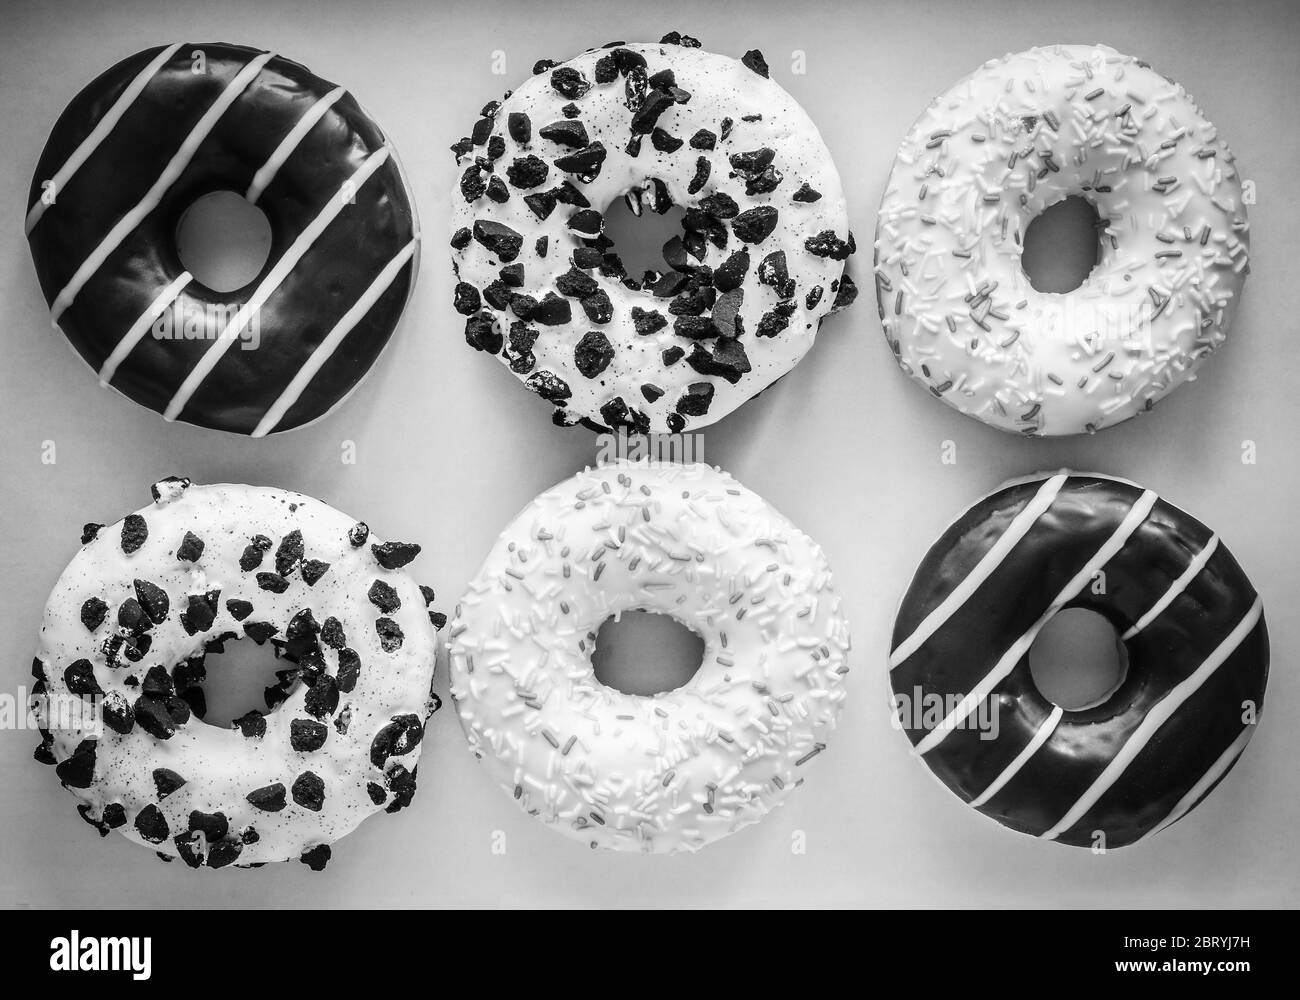 Flat lay image of six ring donuts with white glaze and hundreds and thousands, chocolate and stripes and white glaze with black cookies Stock Photo